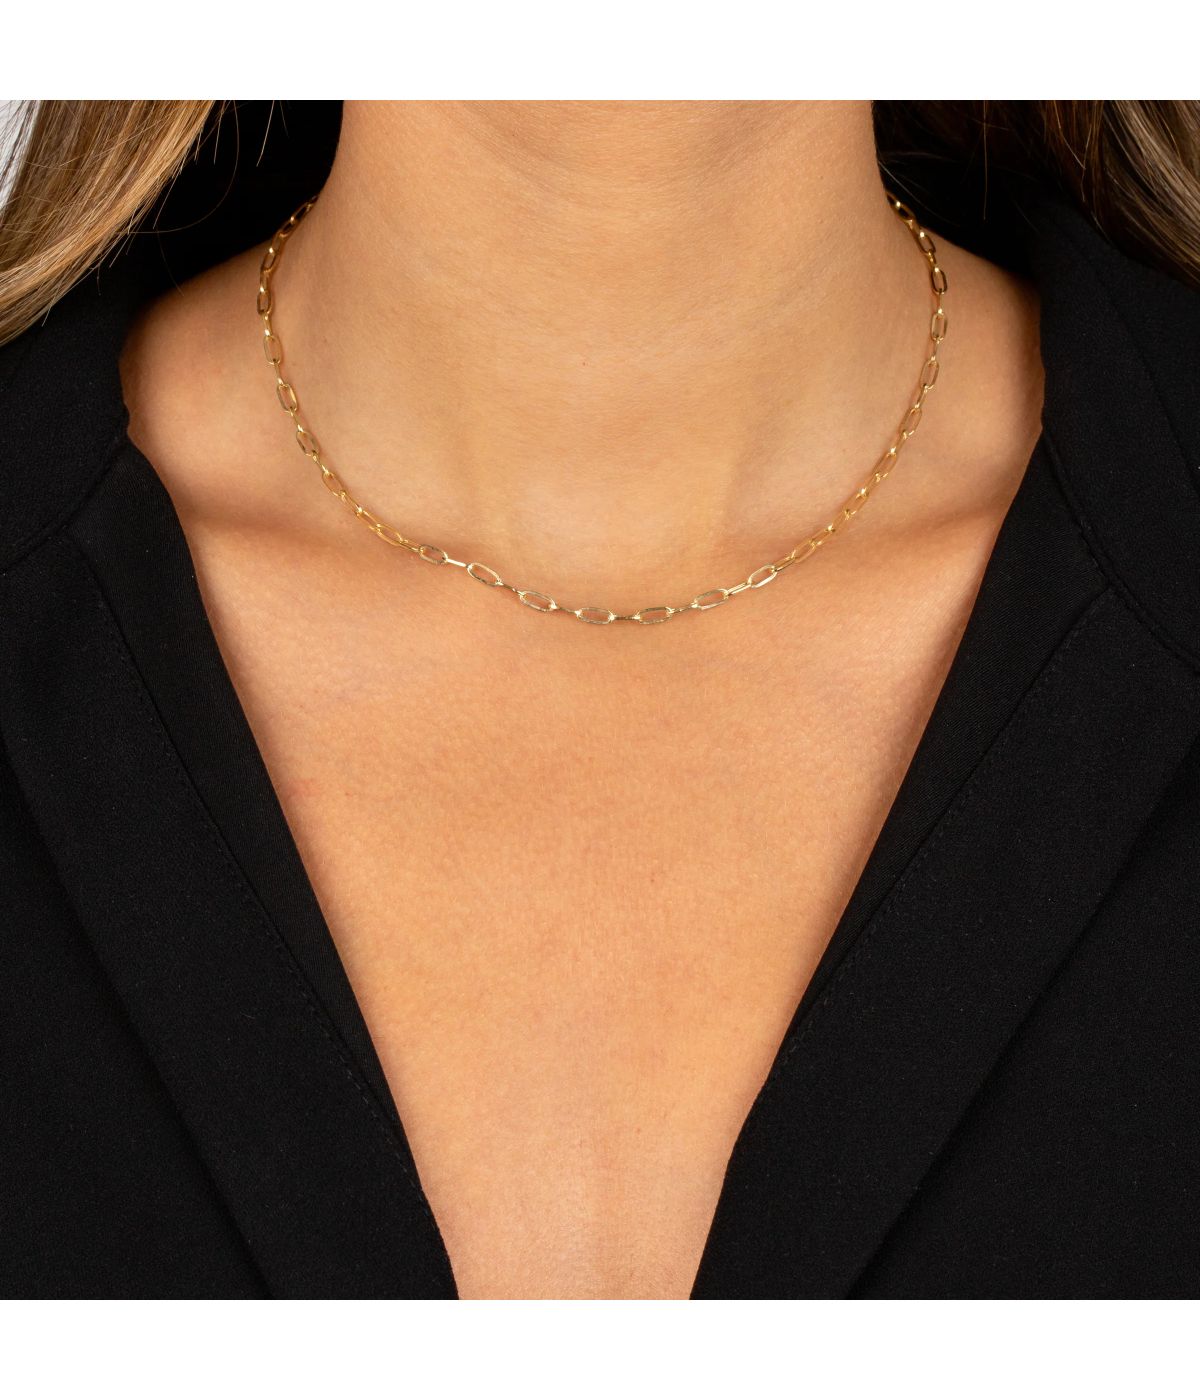 Small Paperclip Necklace 14K Gold